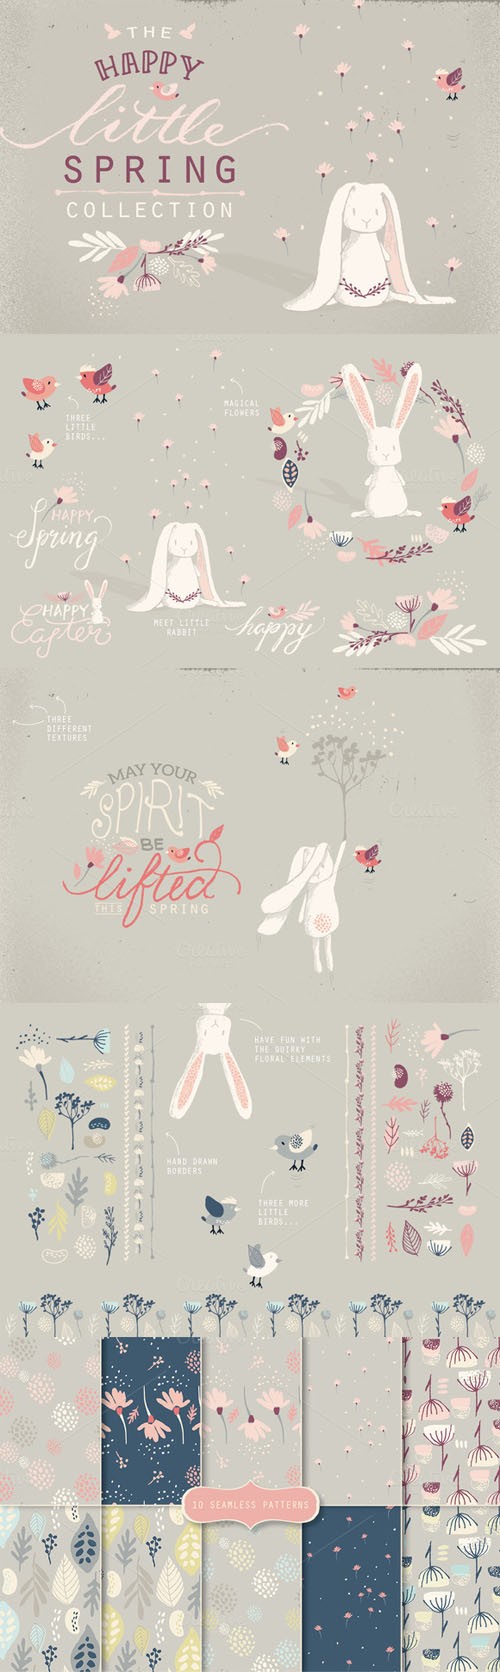 Creativemarket - The Happy Little Spring Collection 214251